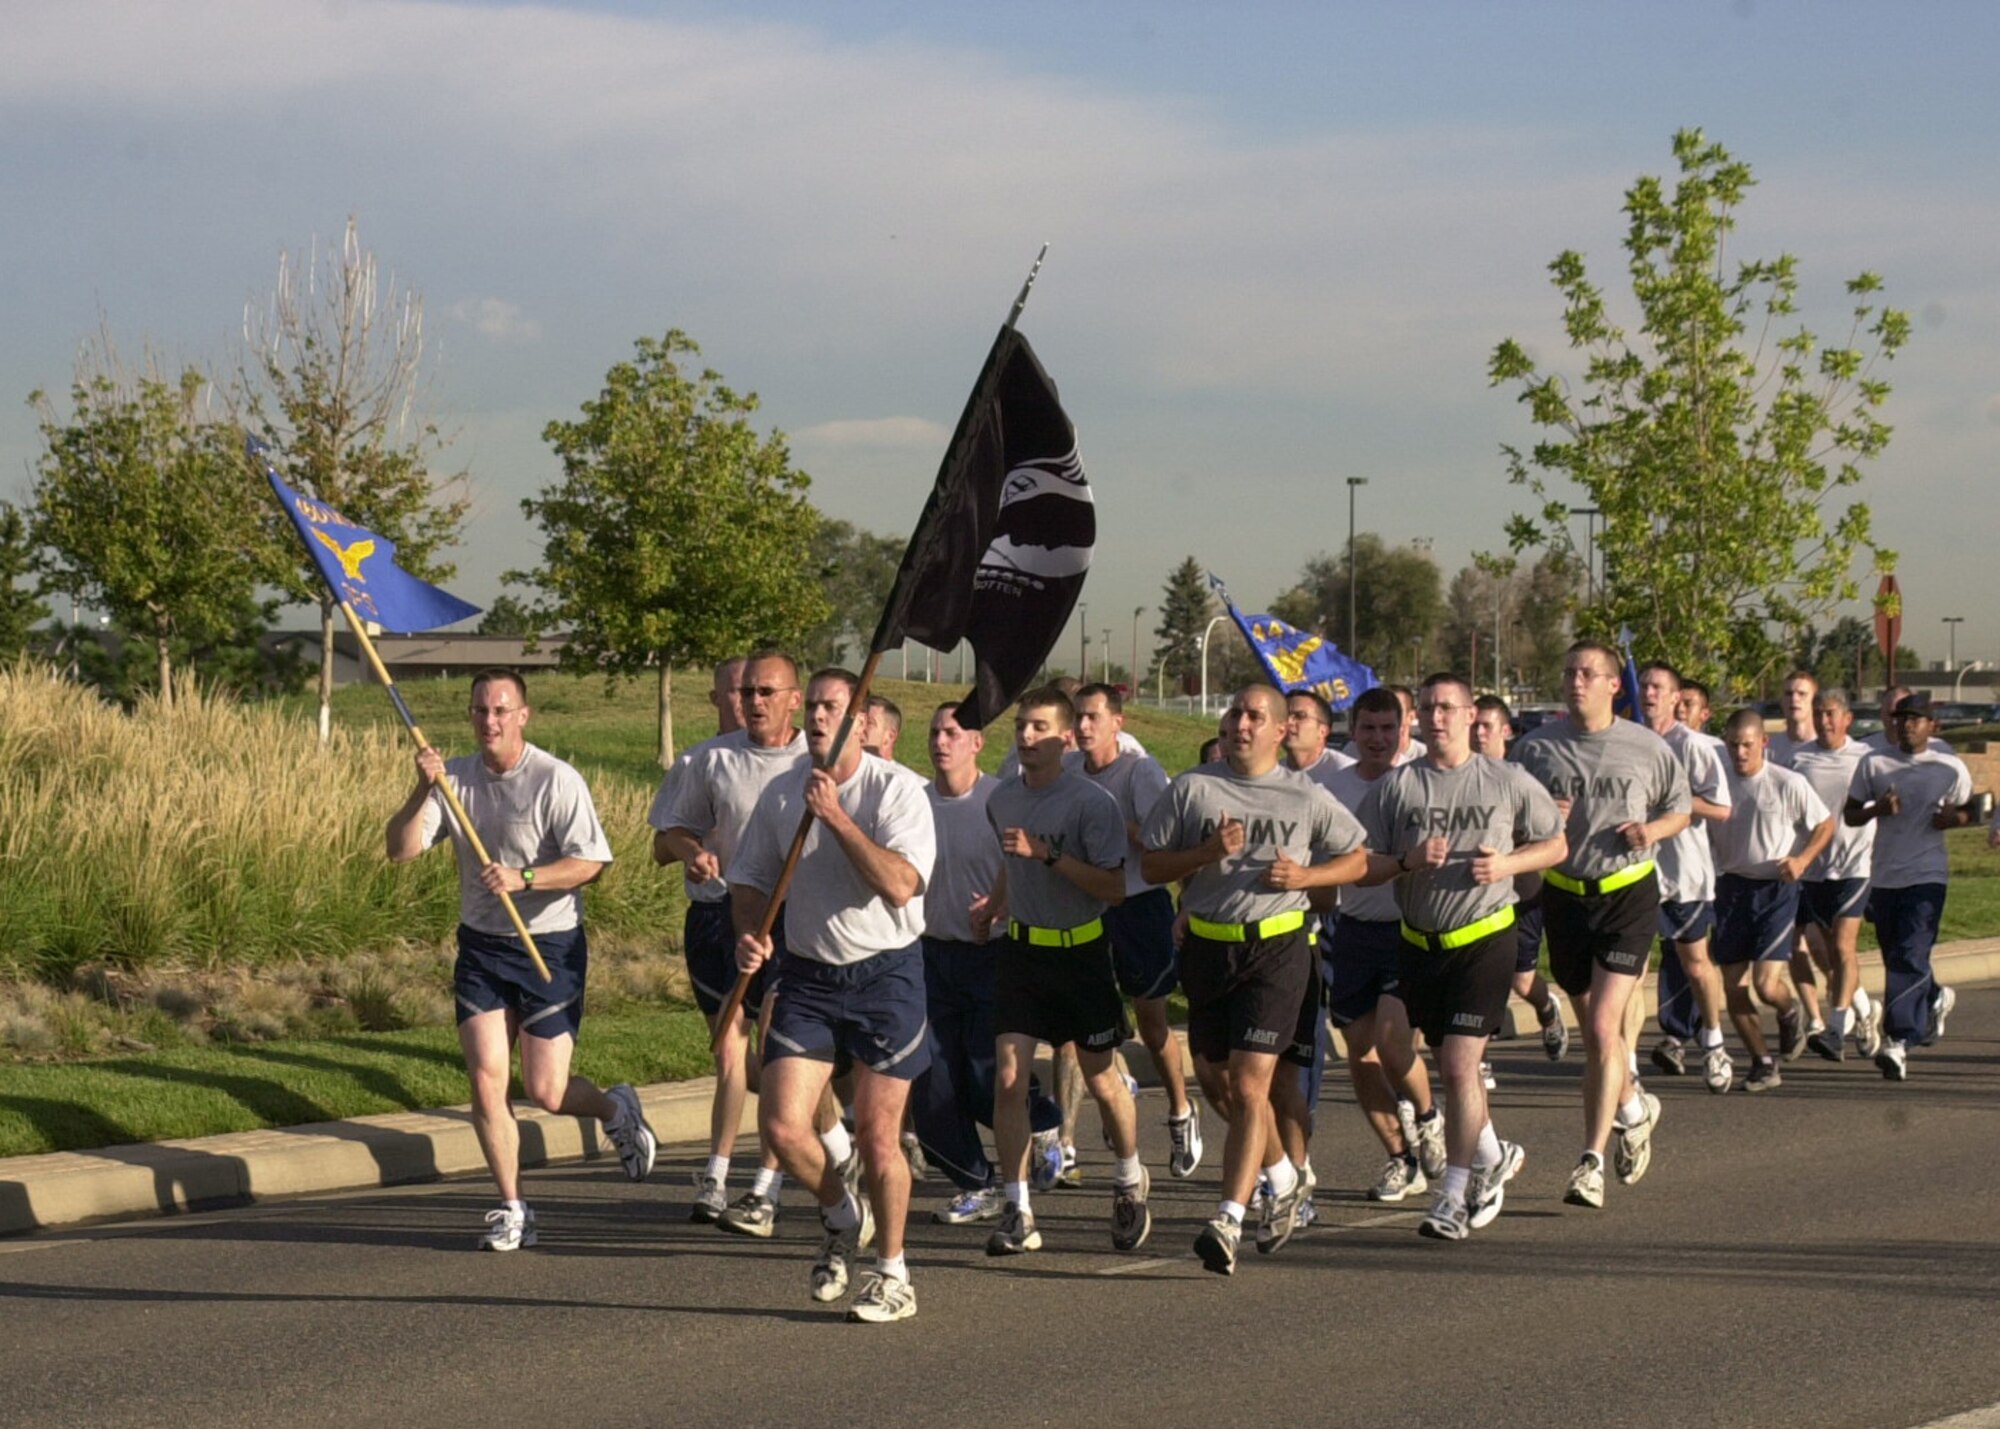 BUCKLEY AIR FORCE BASE, Colo. -- Airmen and Soldiers run with the POW/MIA flag during Team Buckley's Memorial Run Sept. 15. to pay tribute on National POW/MIA Recognition Day. Members from all services took part in the run as well as a POW/MIA vigil. The vigil concisted of four-person teams standing posts for 15 minutes throughout the day around the flag poles in front of the 460th Space Wing headquarters building here. (U.S. Air Force photo by Airman 1st Class Michelle Cross)                     